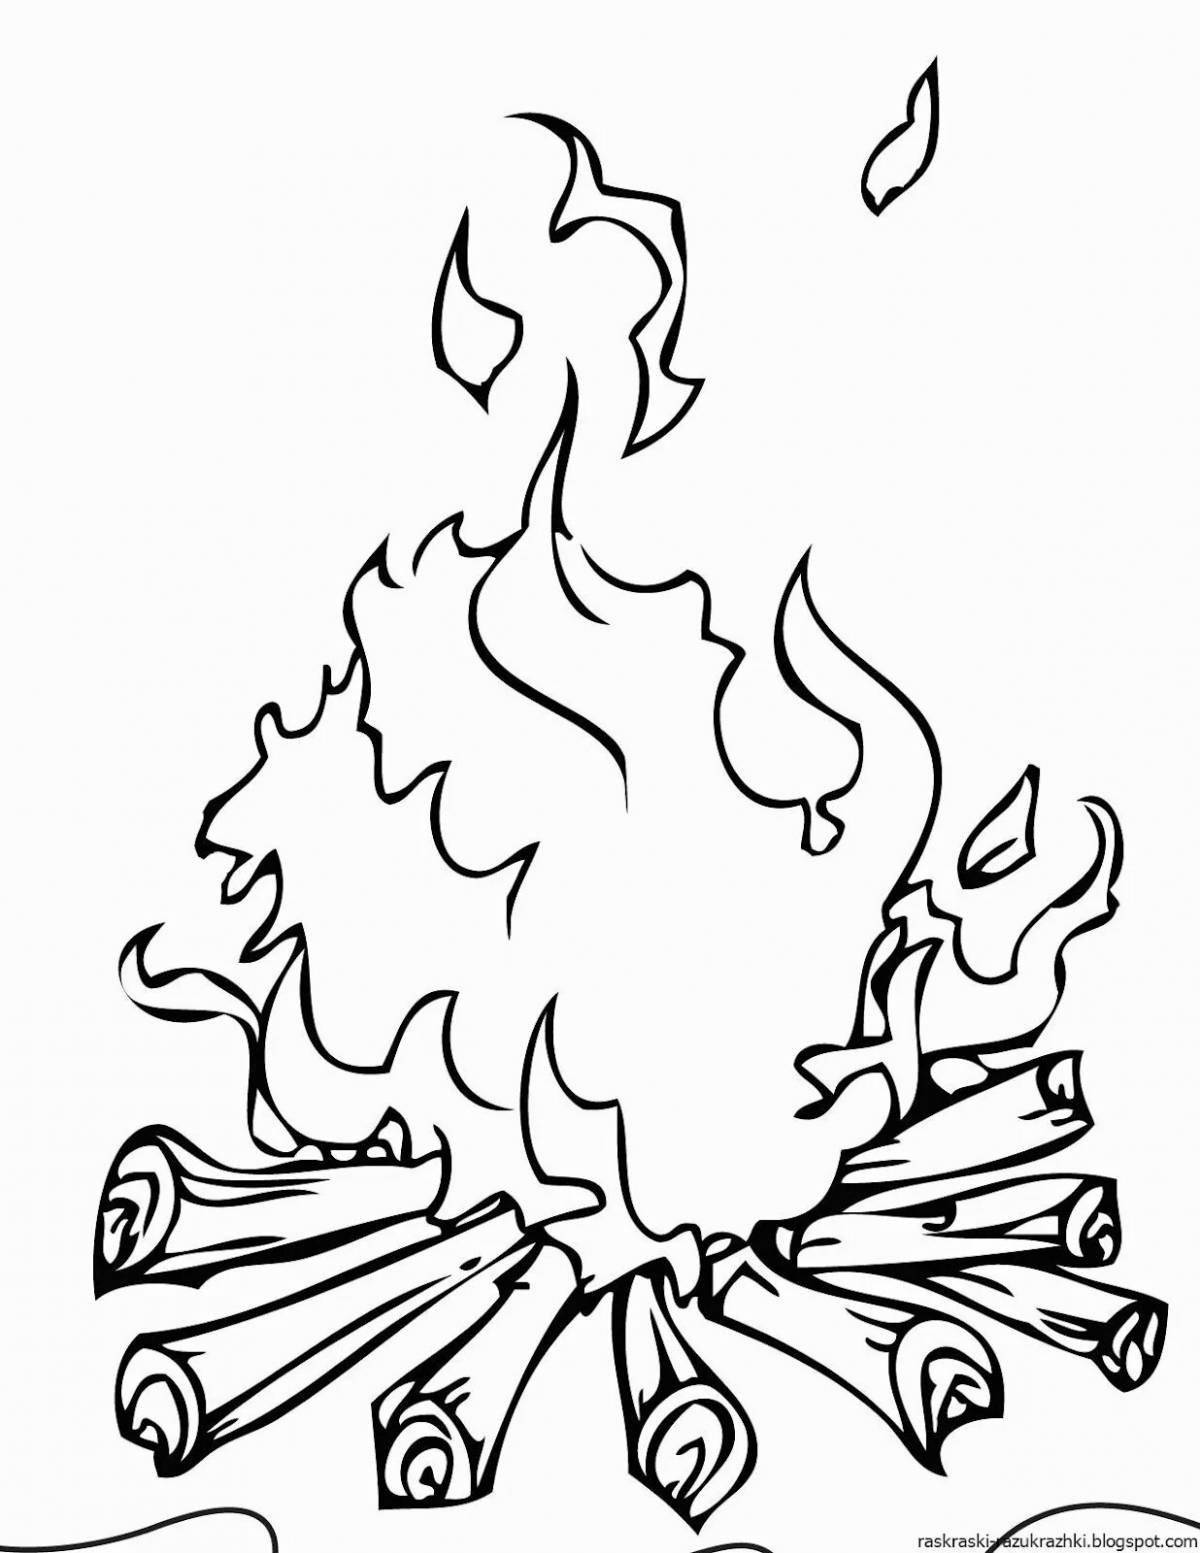 Animated flame coloring page for kids